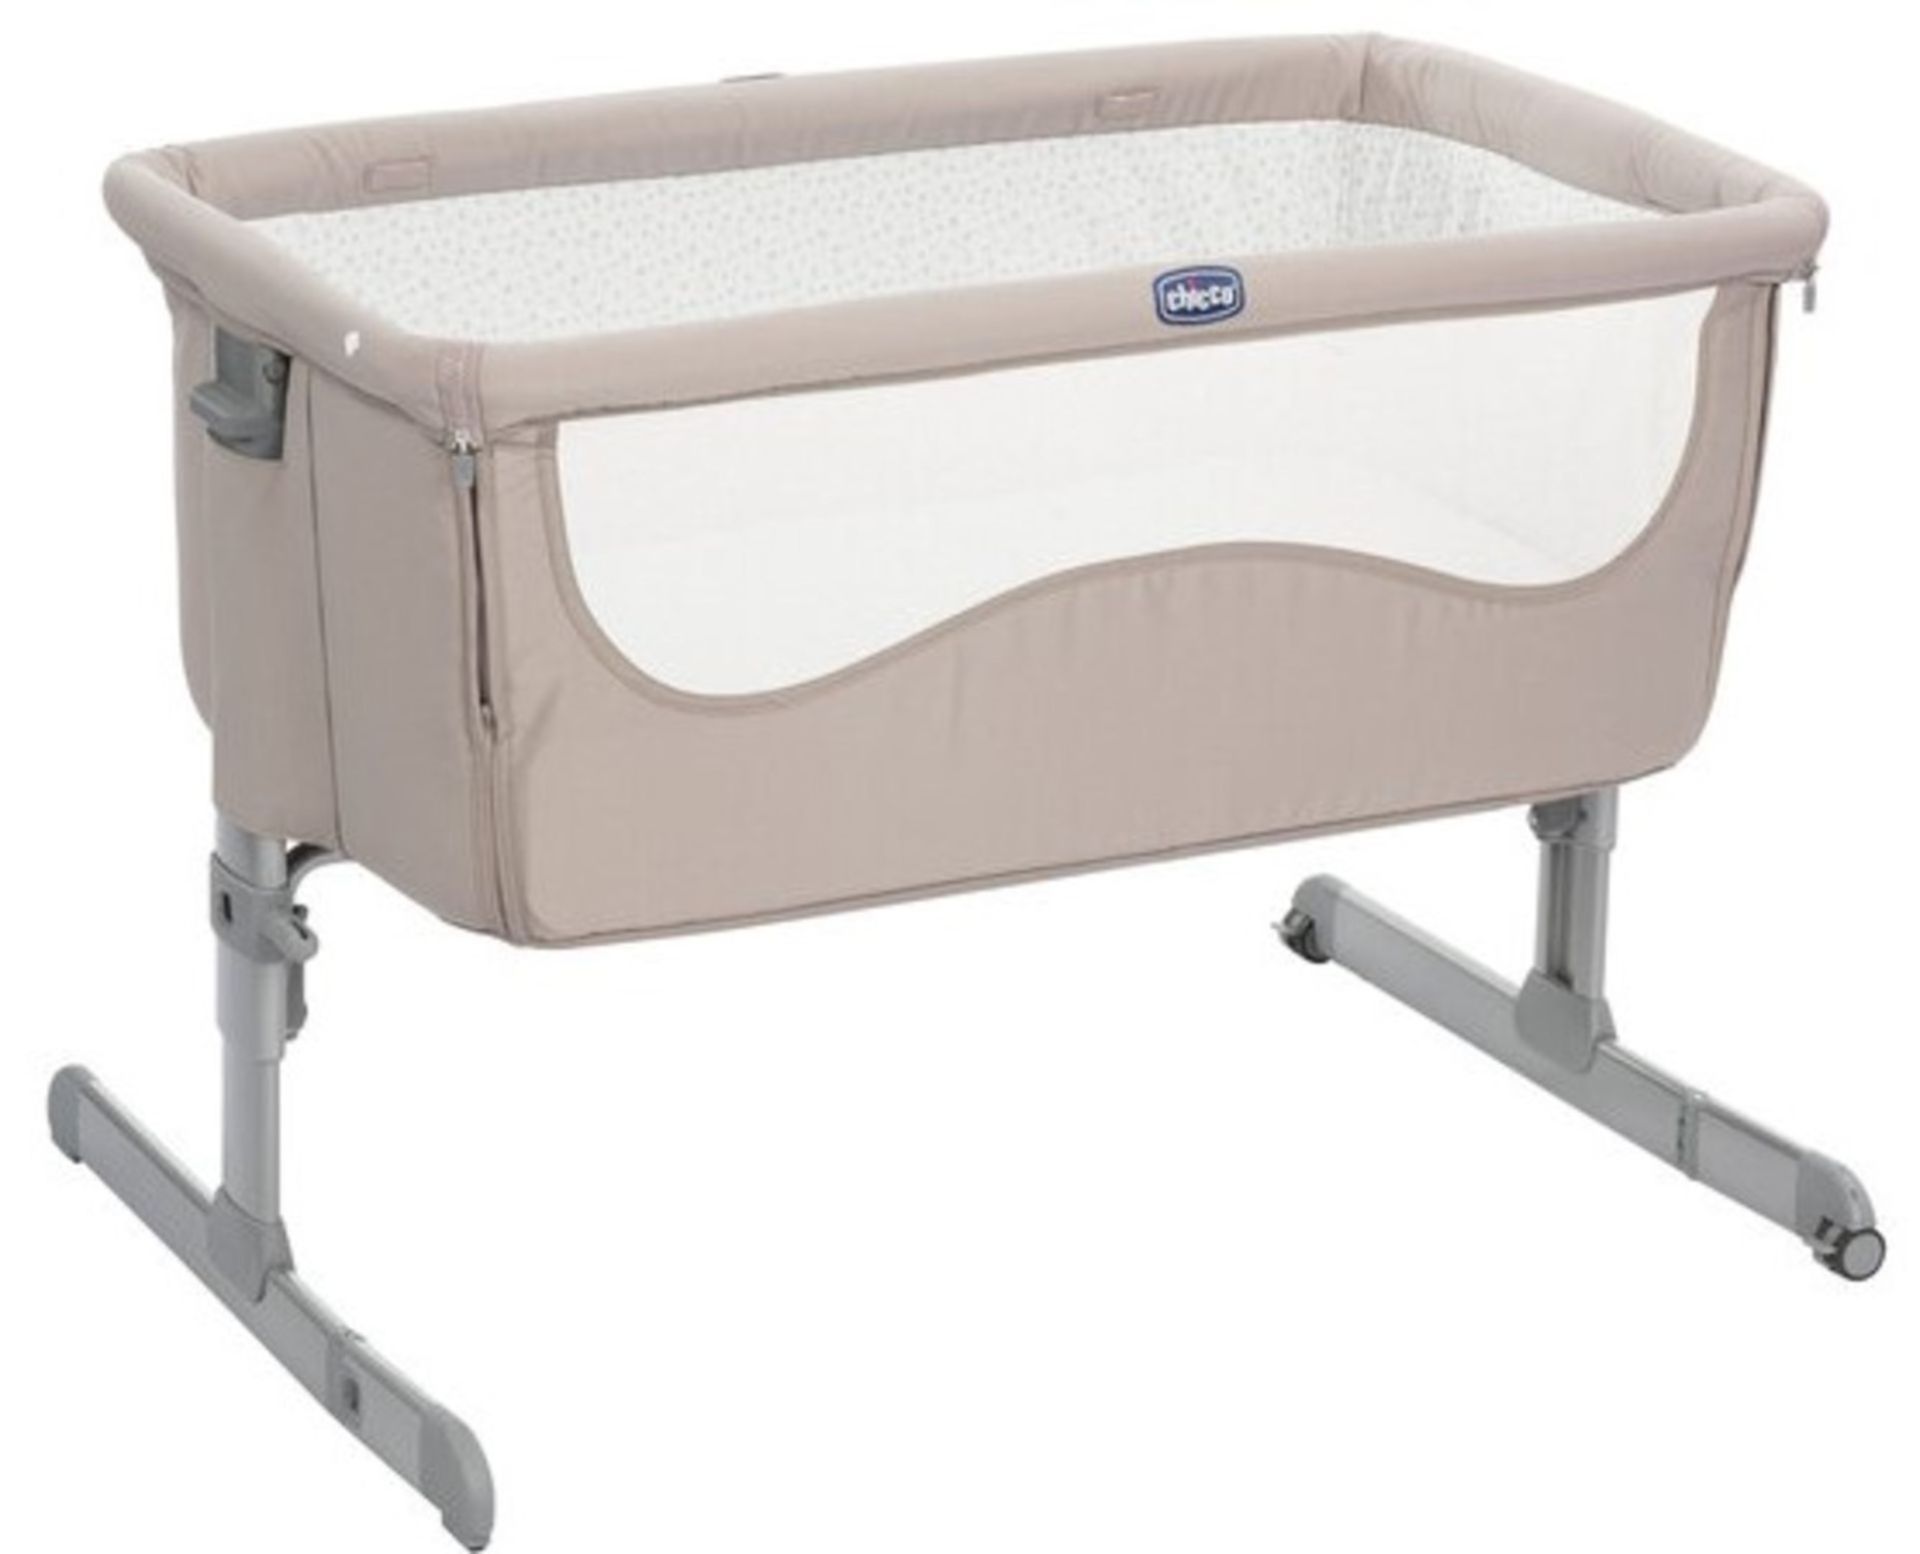 1 x Chicco Next2me Chick to Chick Bedside Baby Crib - Brand New 2019 Sealed Stock - Includes - Image 2 of 2